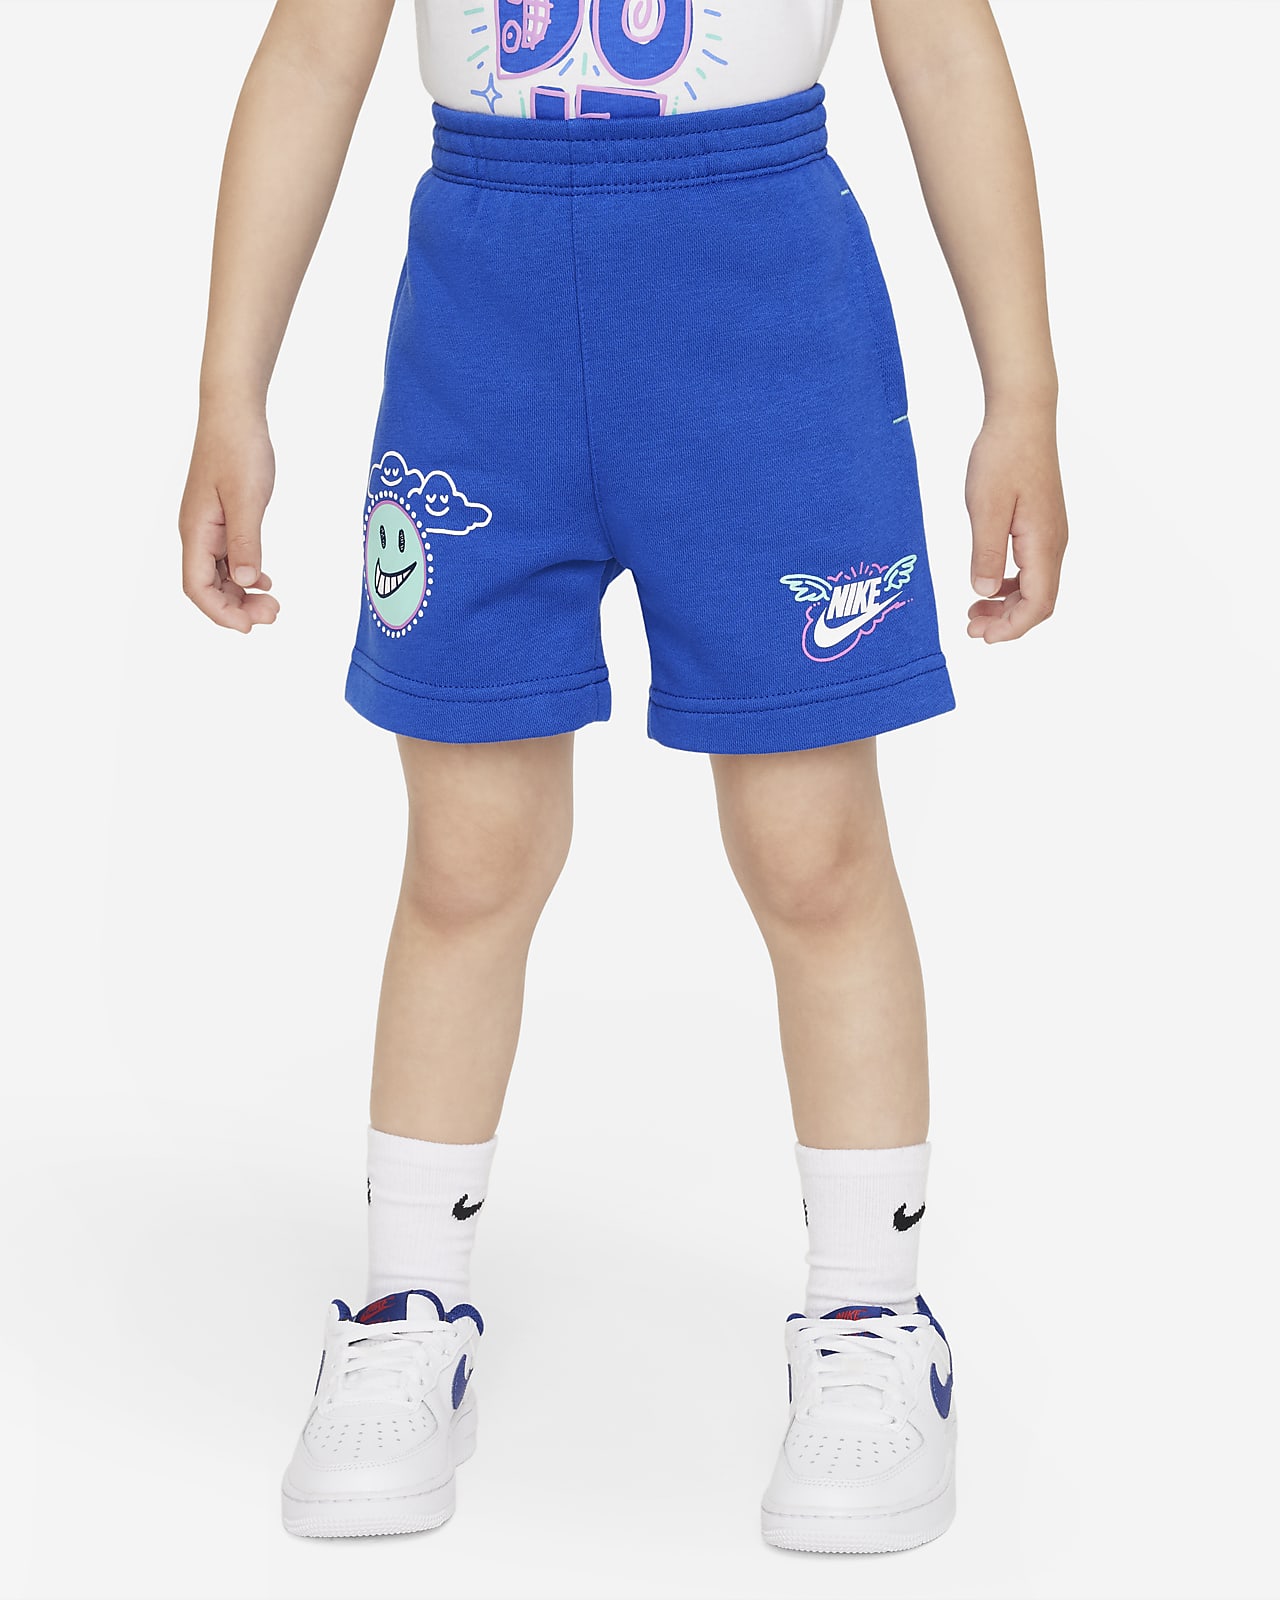 Nike Sportswear "Art of Play" French Terry Shorts Toddler Shorts